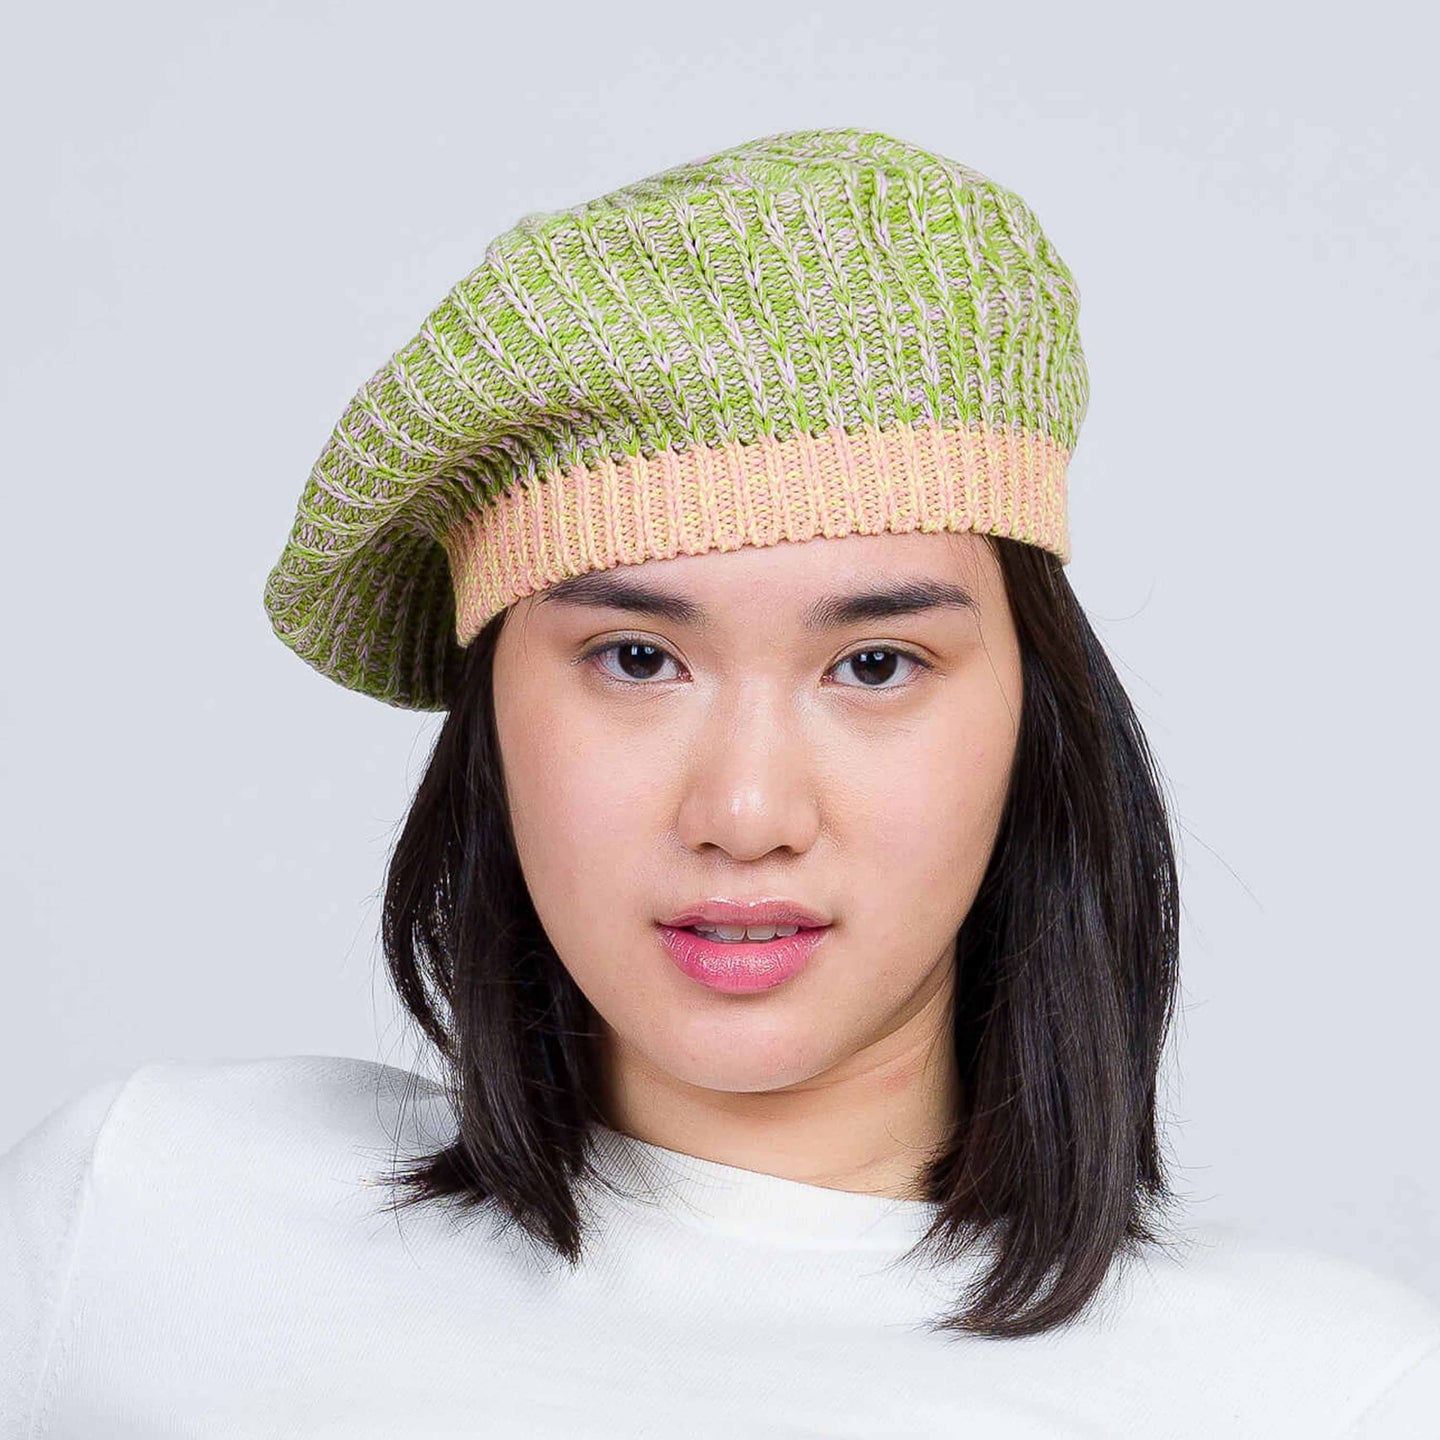 Static Swatch Knit Marl Beret On Model